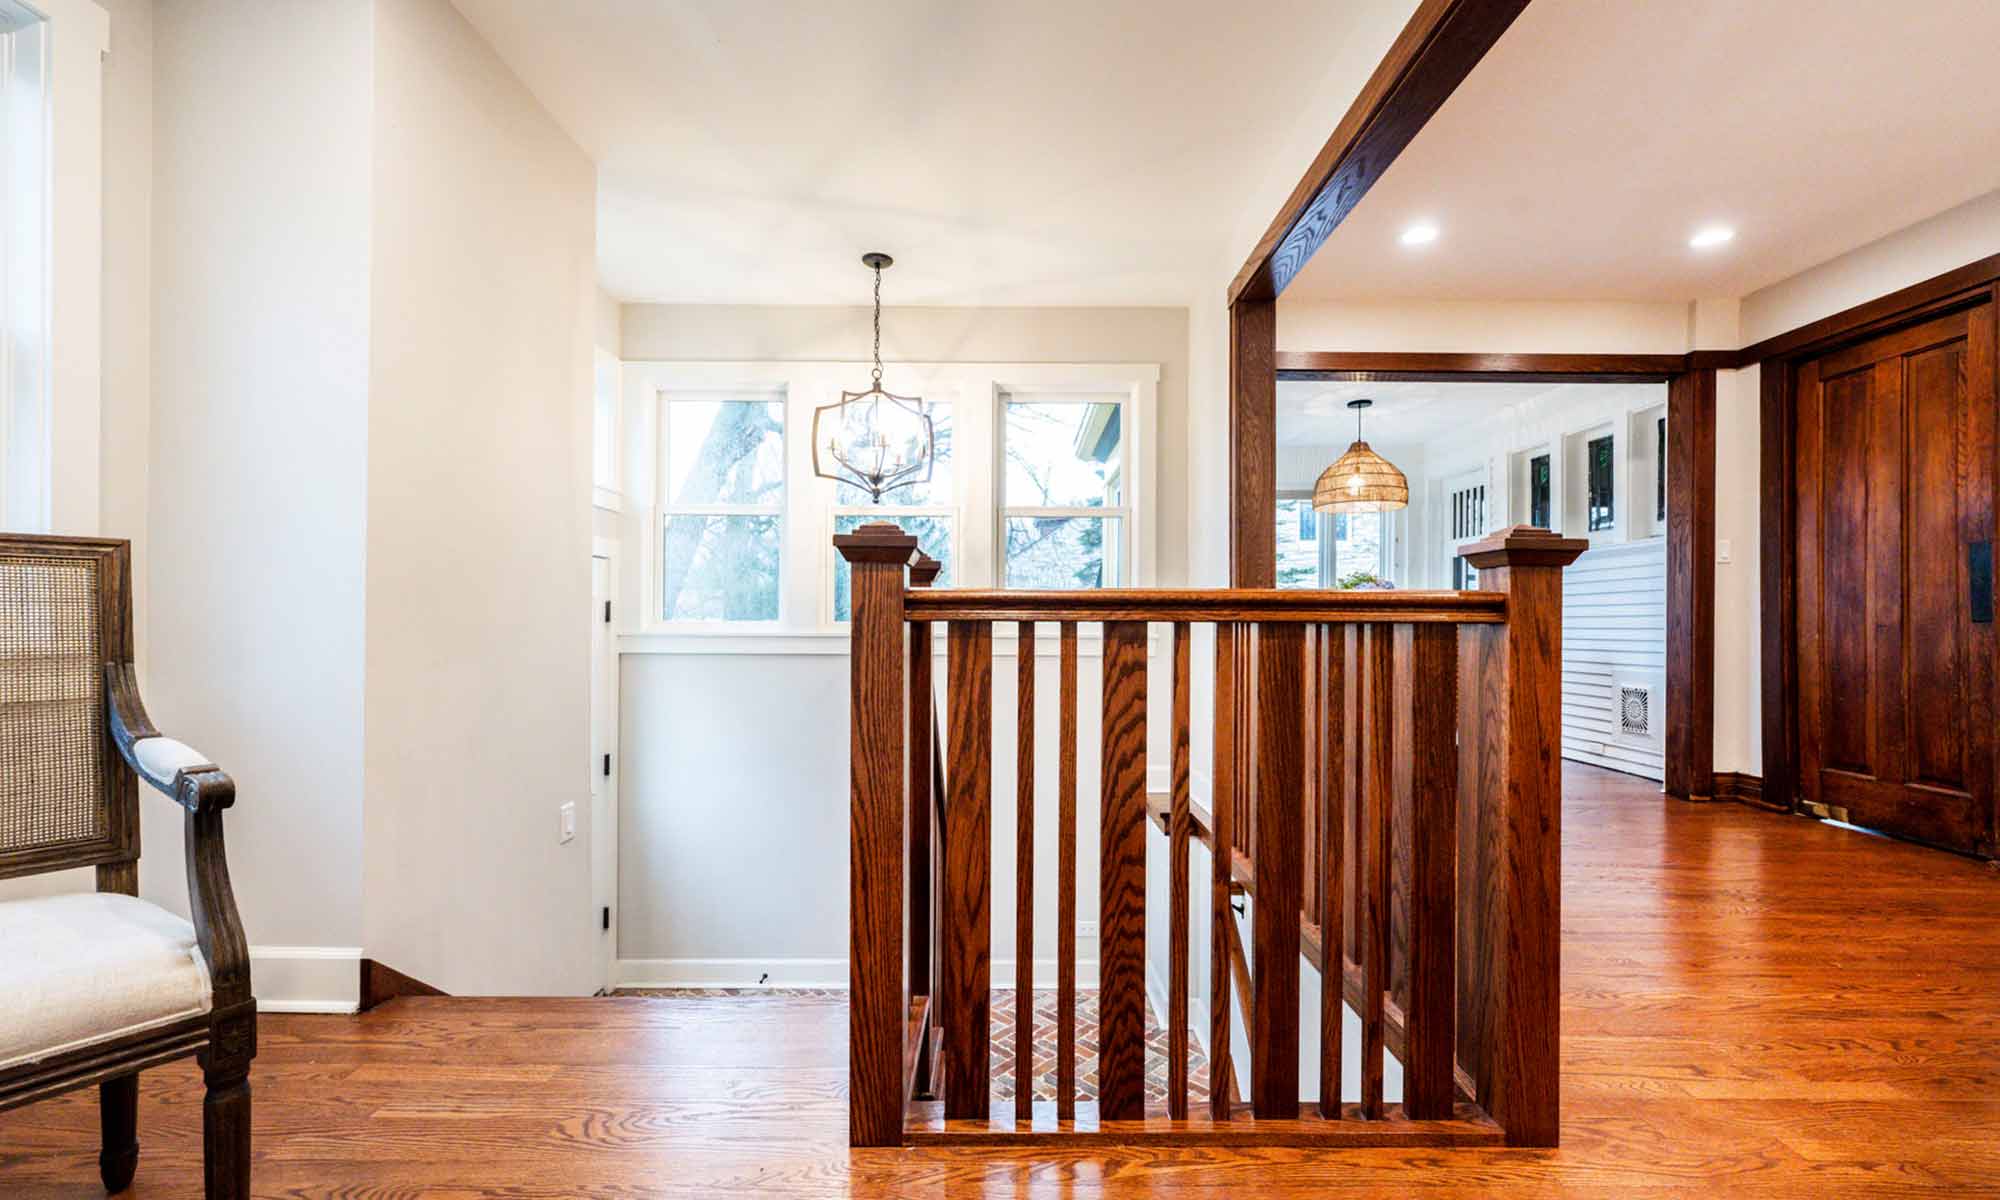 interior view of new oak stairwell and craftsman style railings